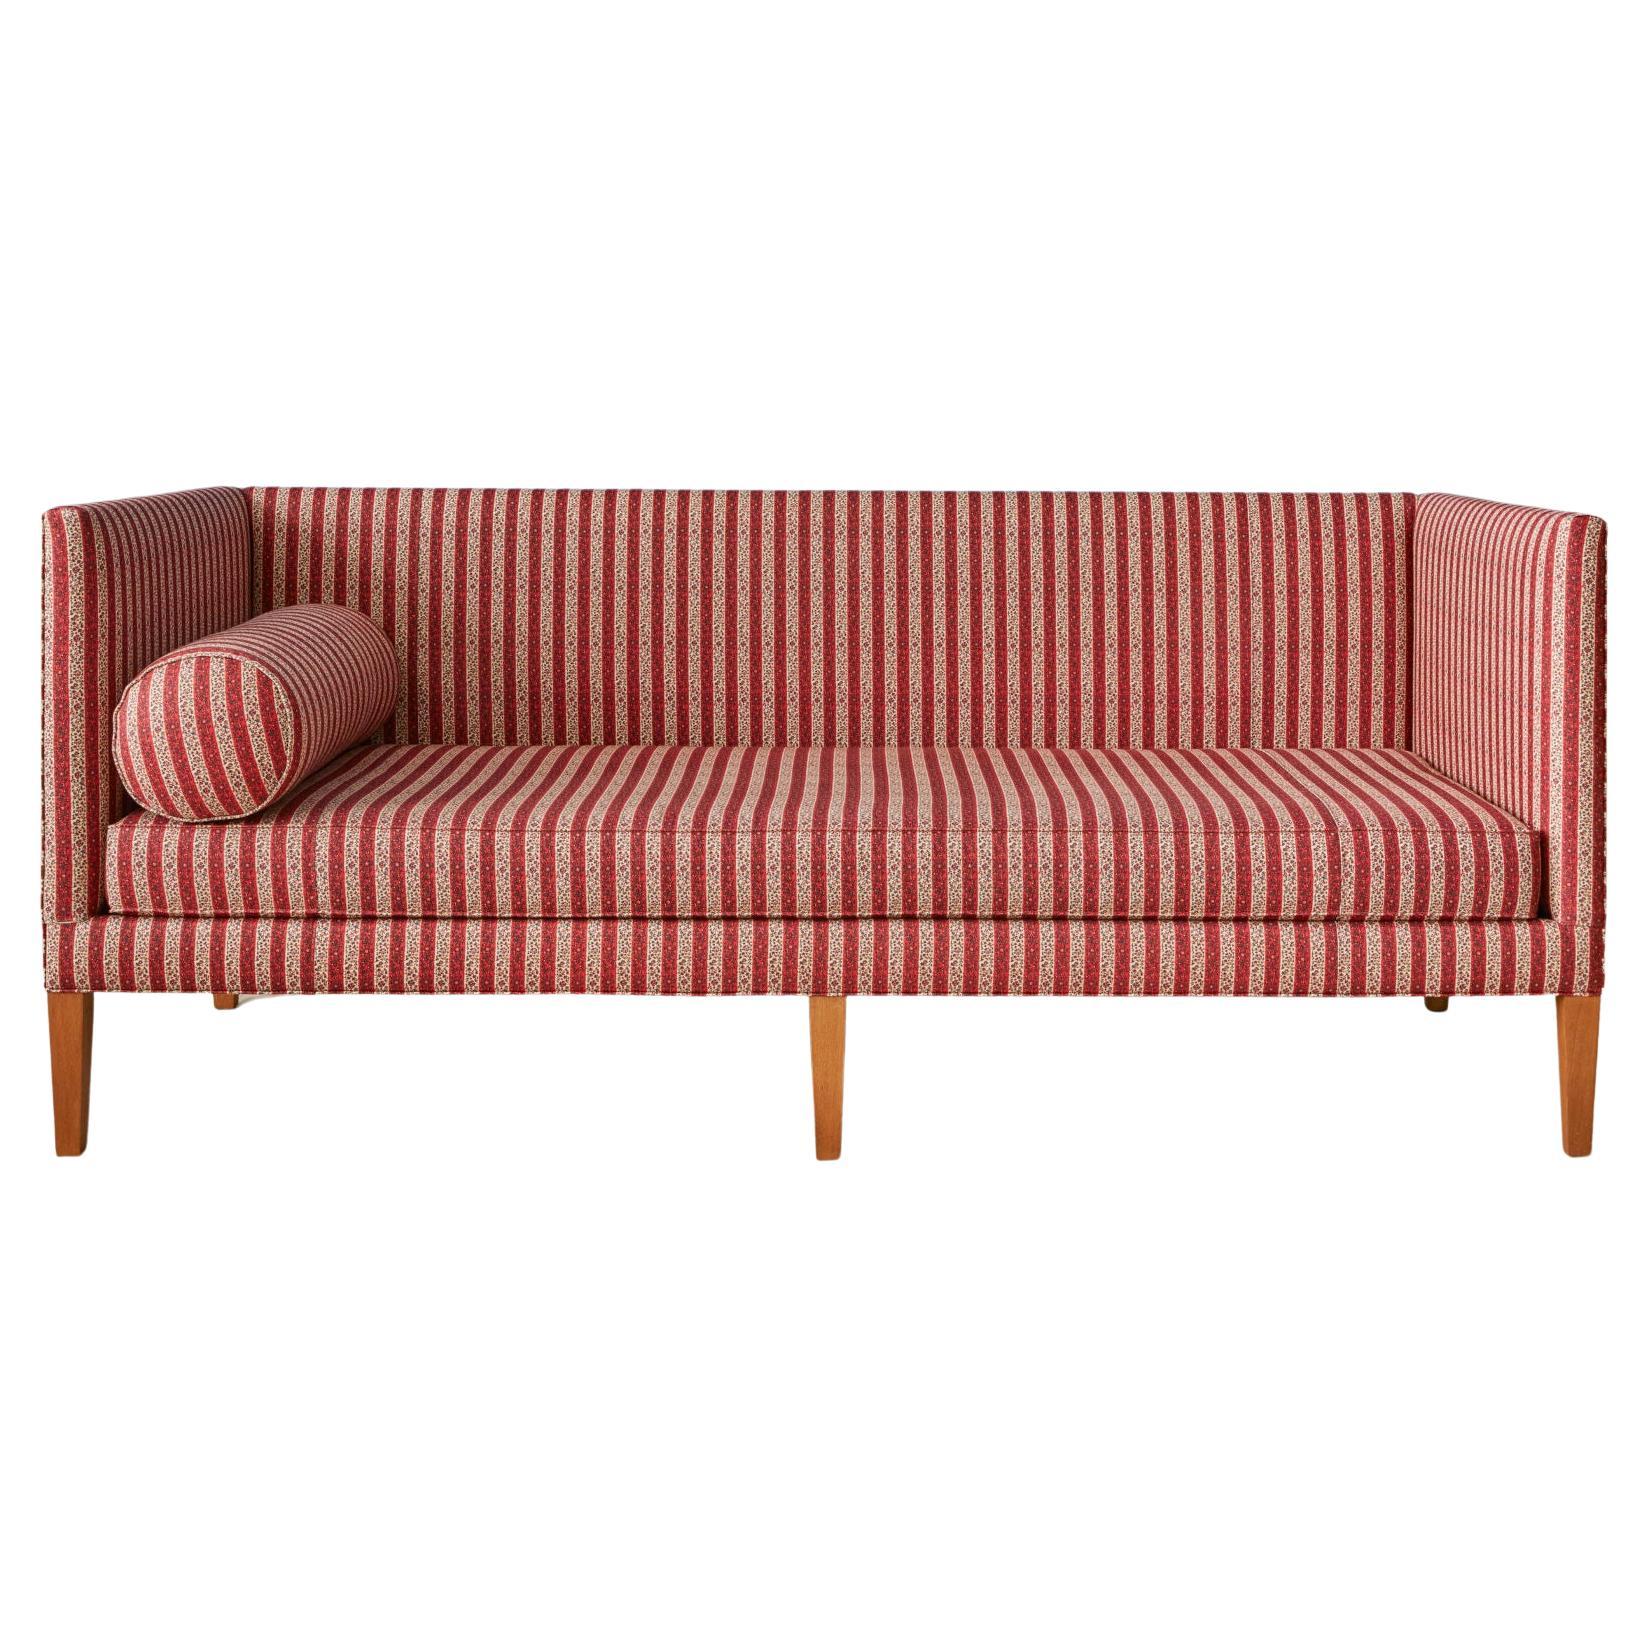 Contemporary Sofa in Customized Striped Red Upholstery by the Apartment, Belgium